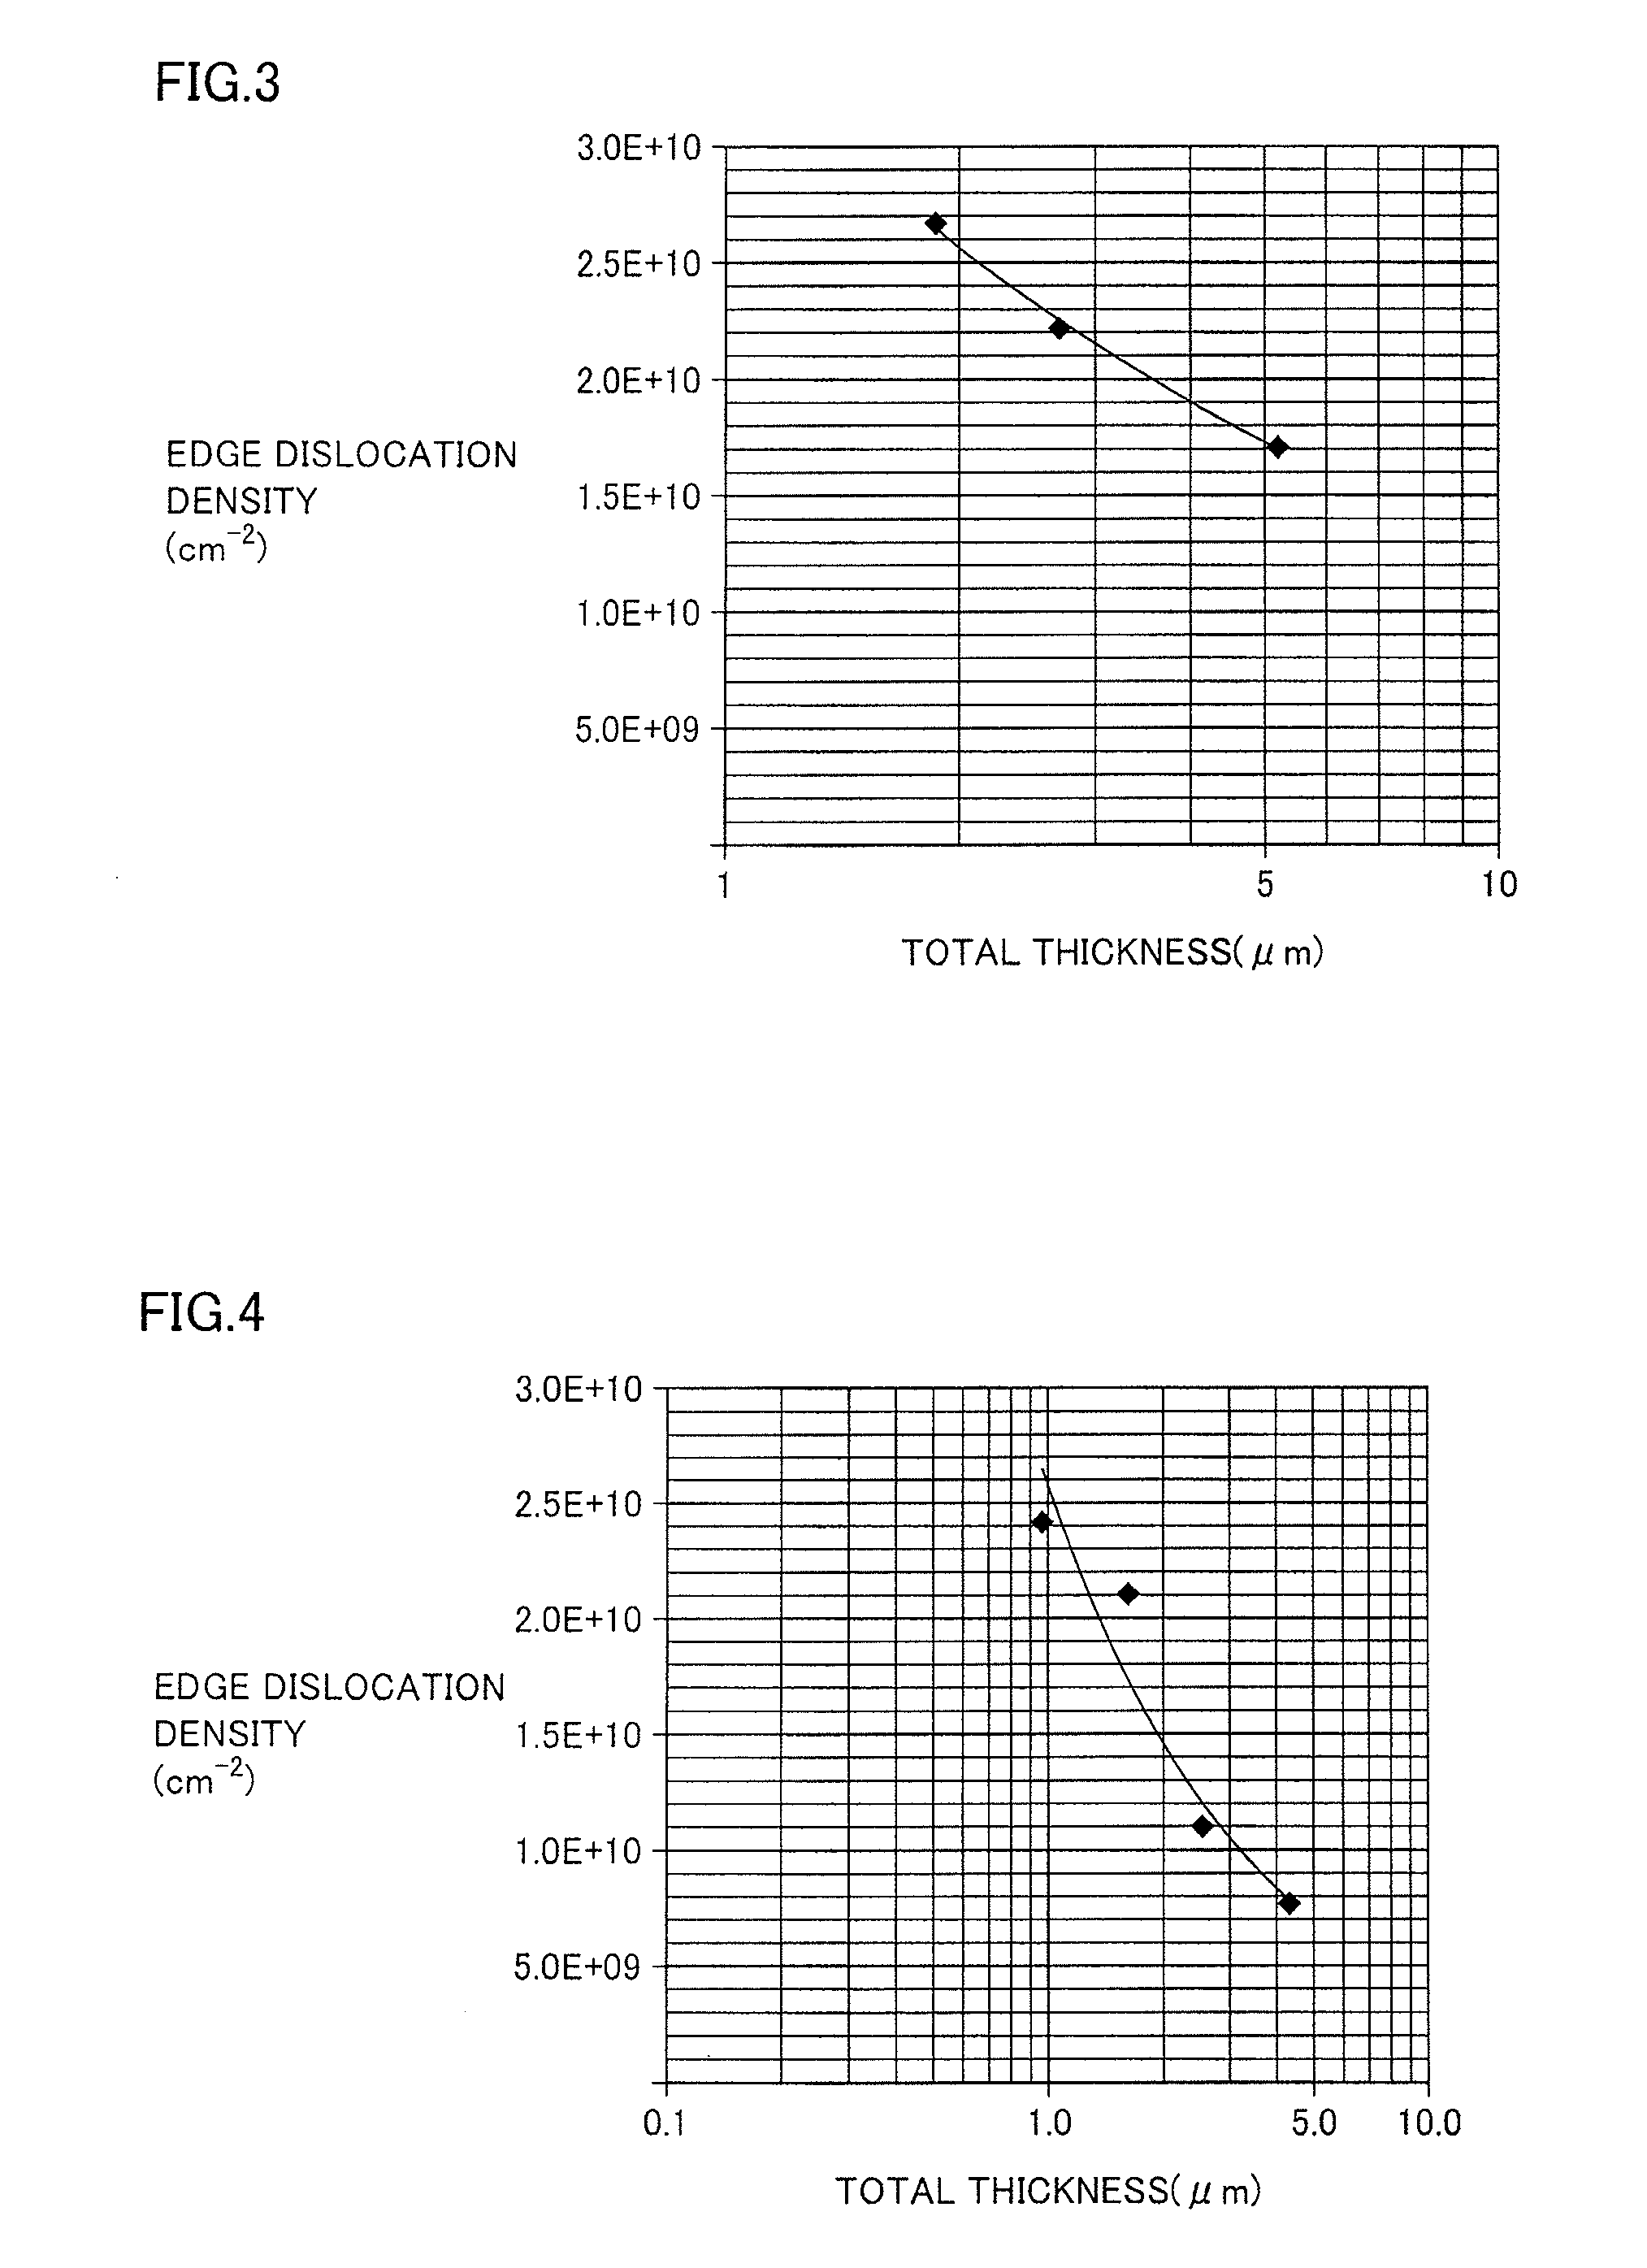 Epitaxial wafer including nitride-based semiconductor layers